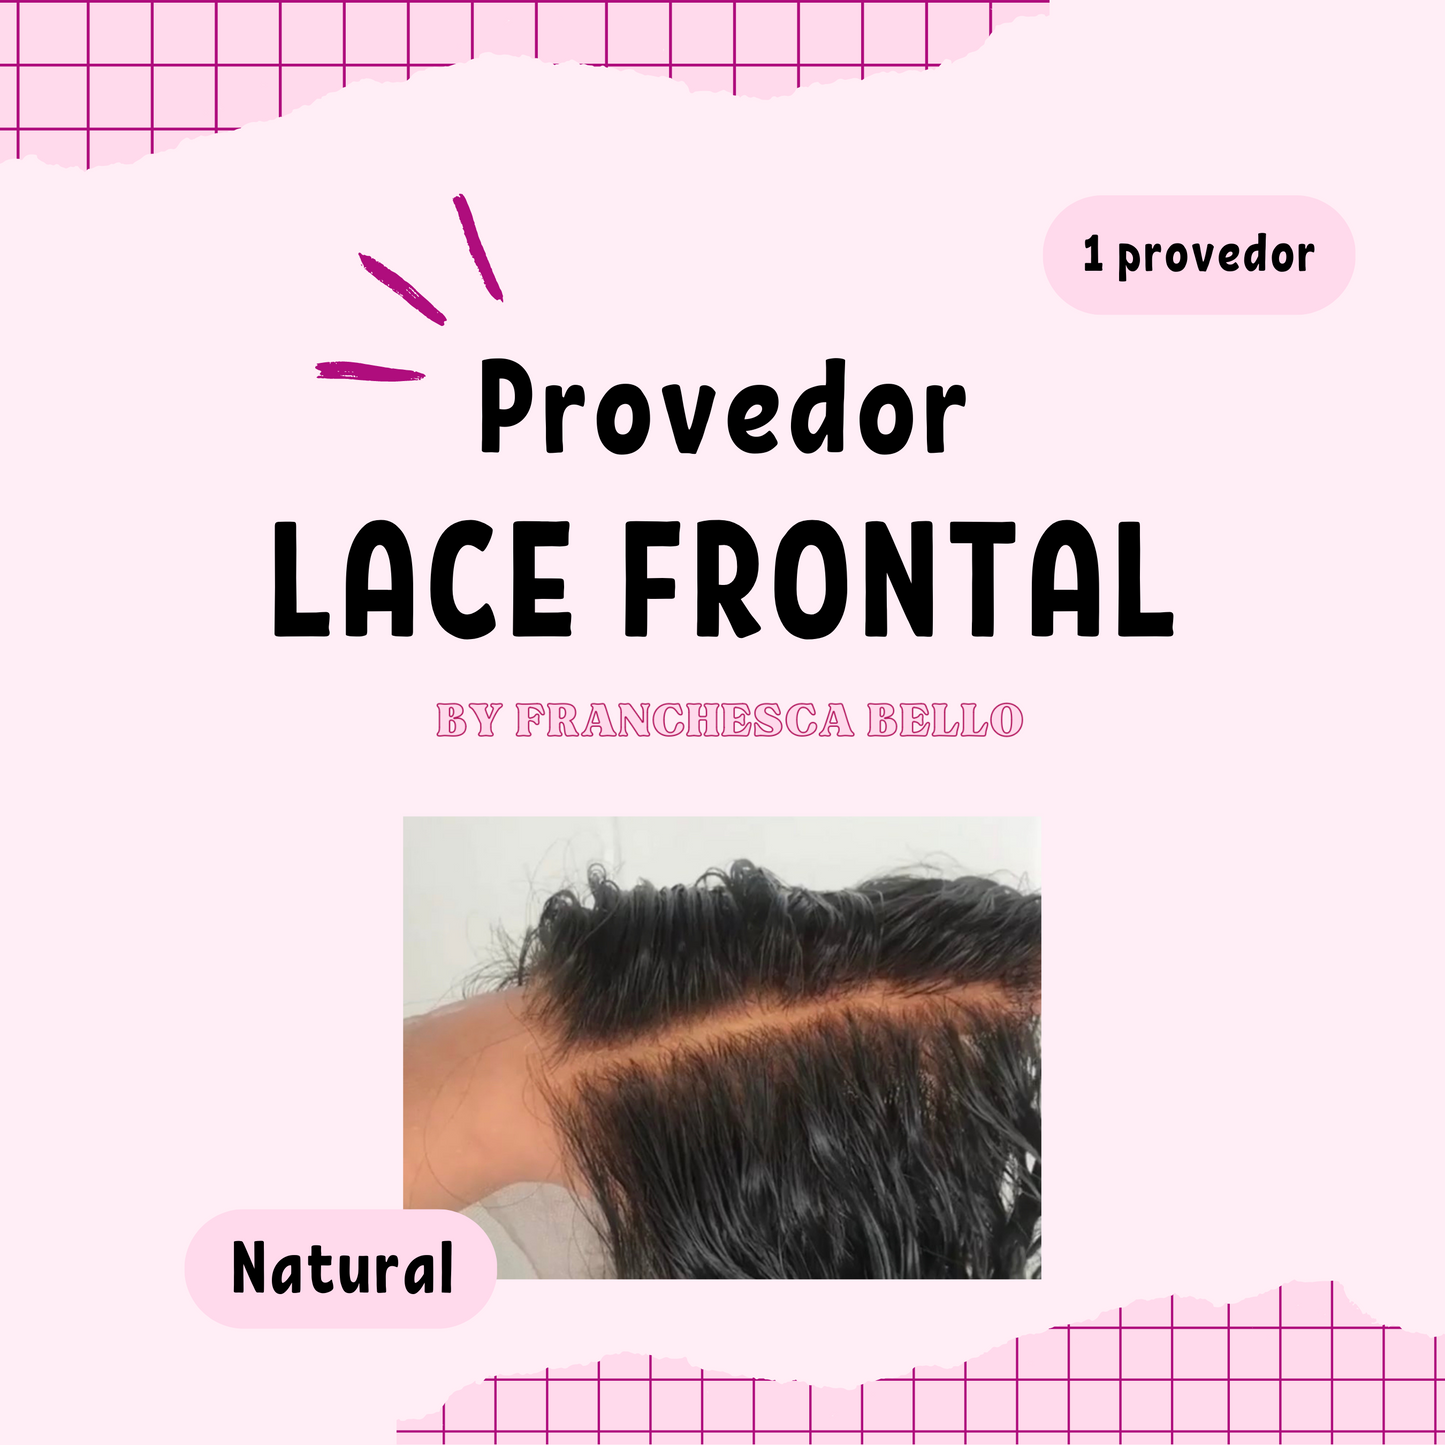 Provedor Lace Frontal